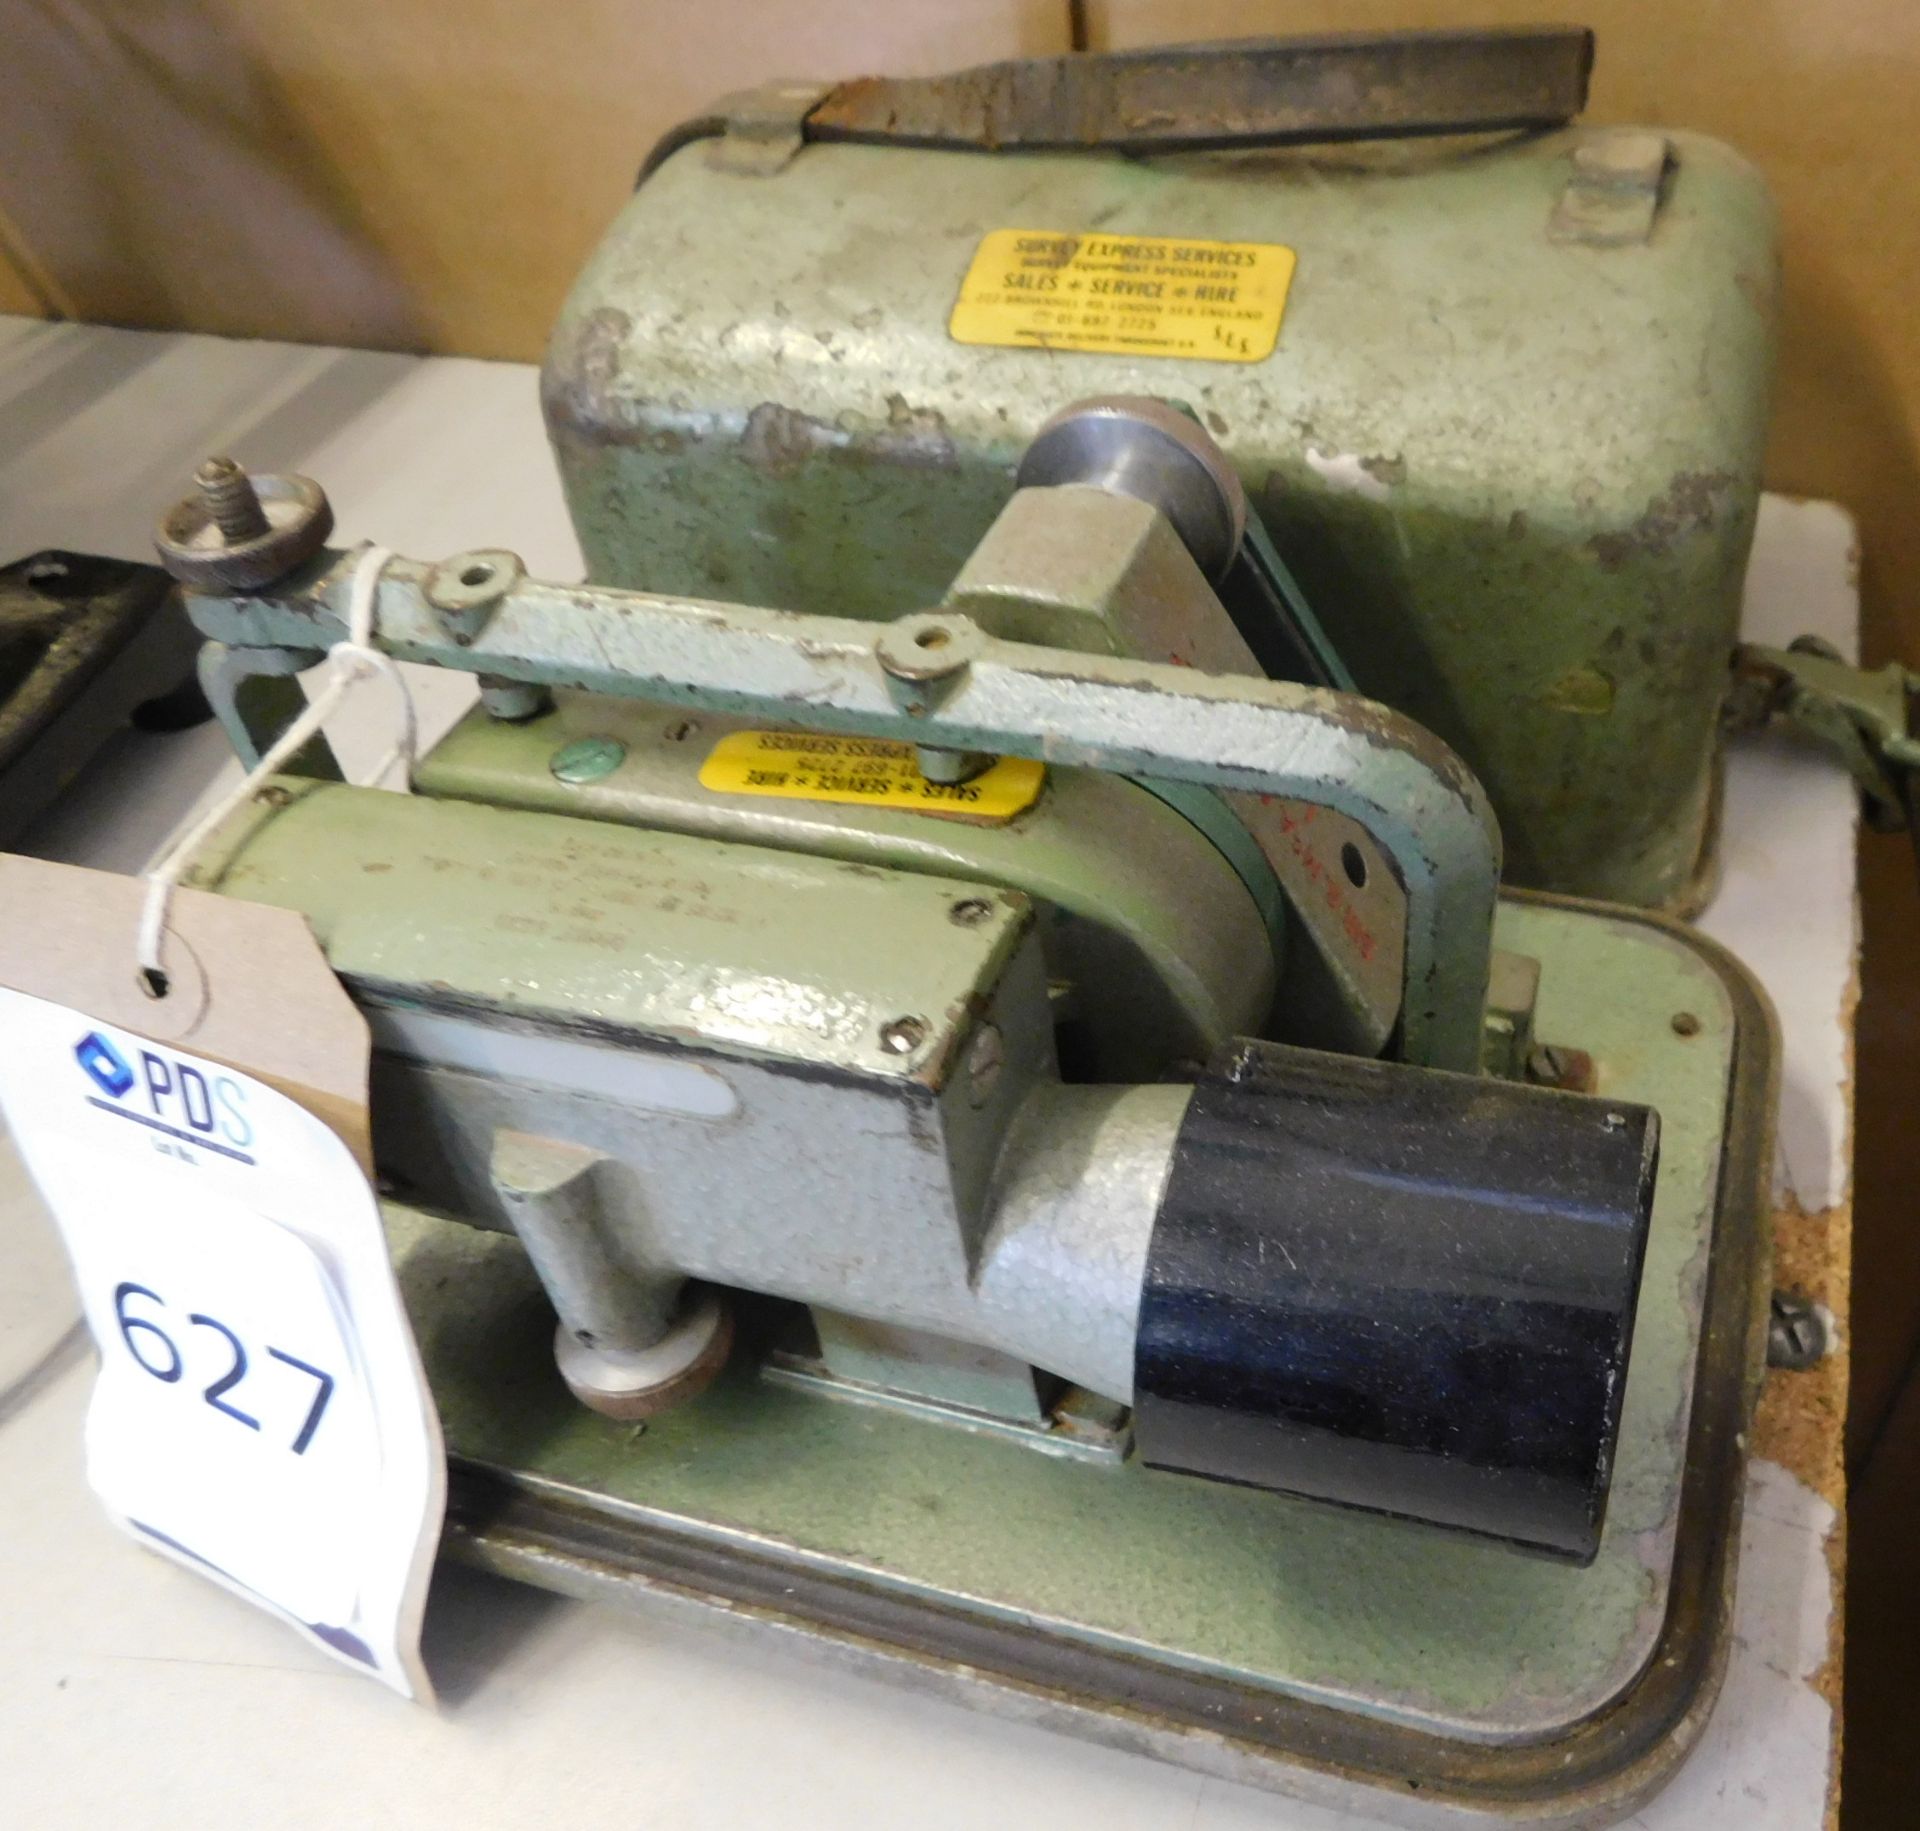 Vickers Instruments Cook 8830 Vintage Level (Location Stockport. Please Refer to General Notes)